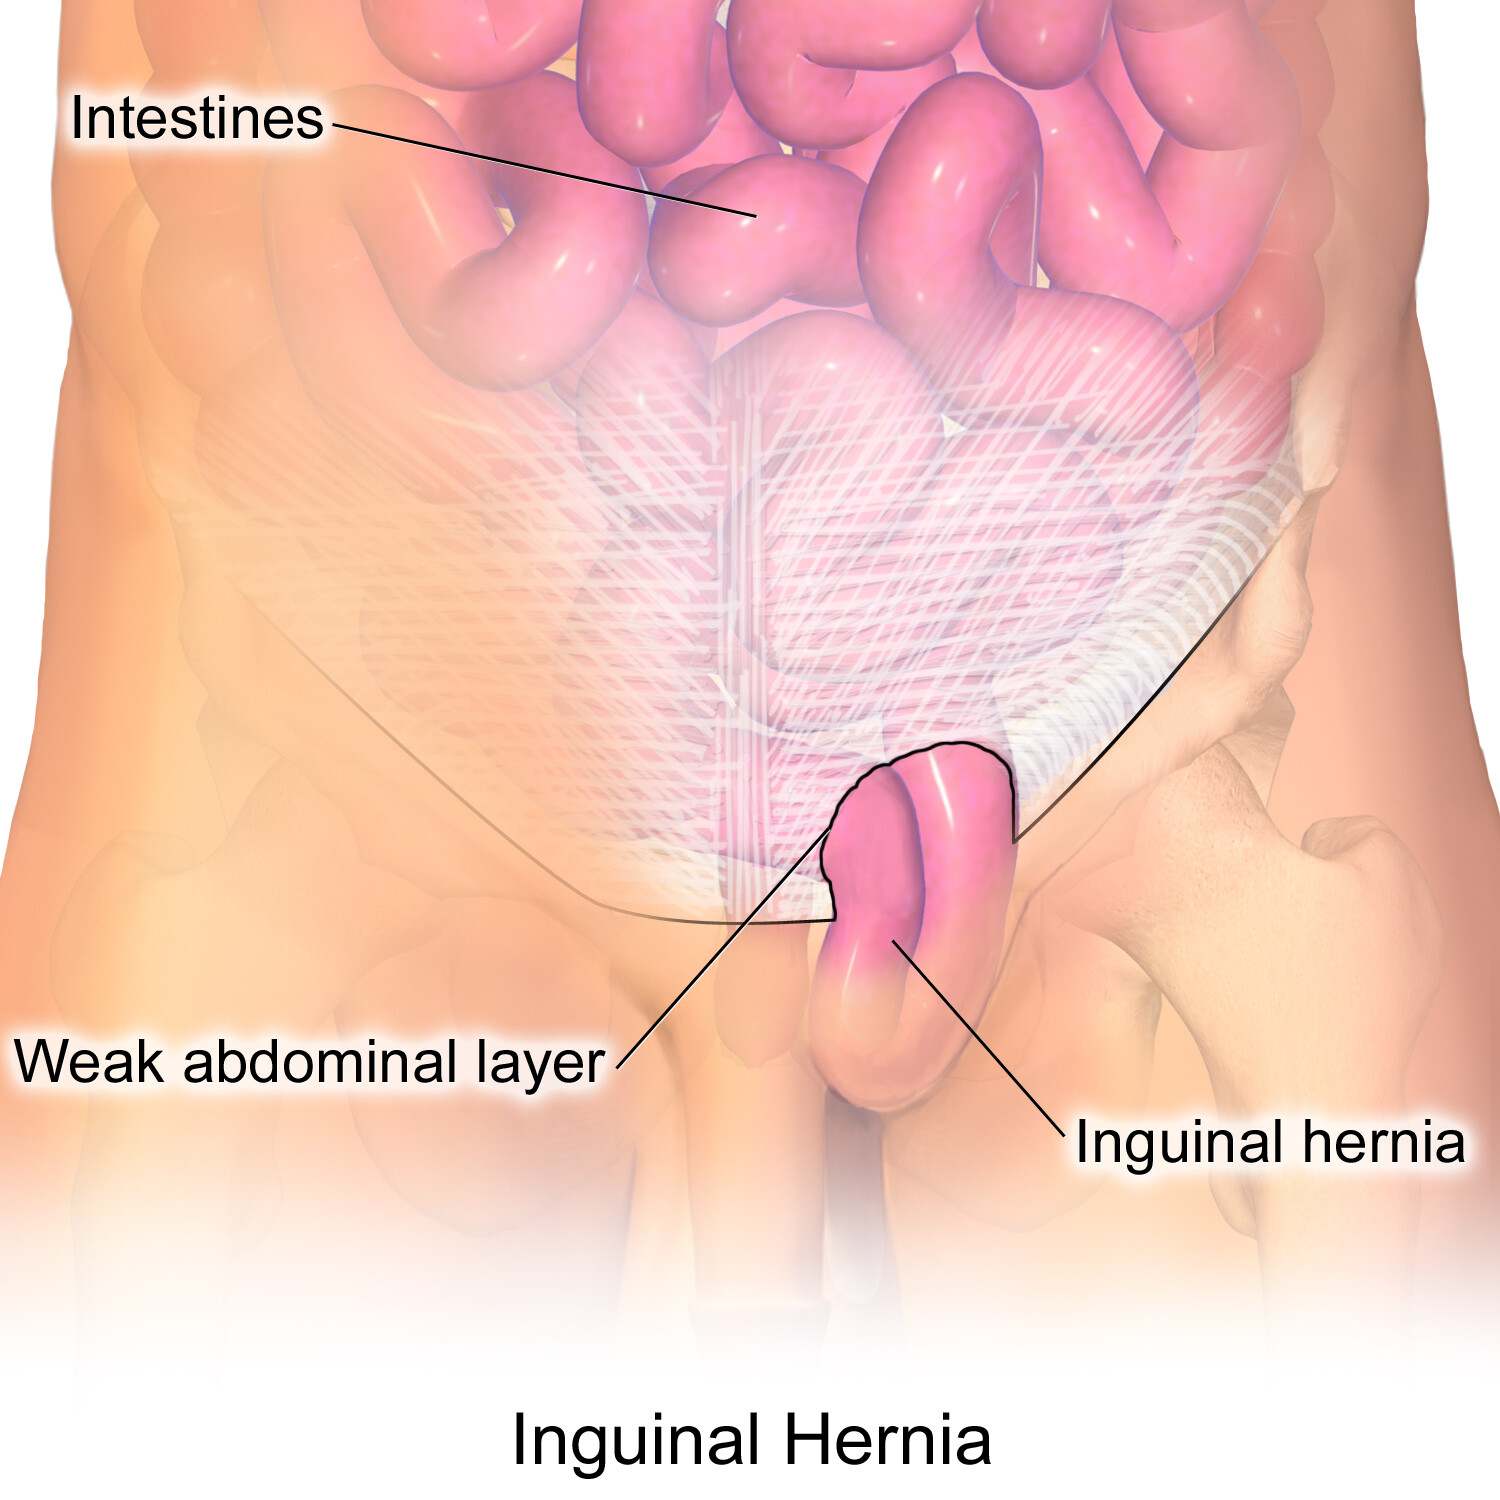 What Is an Inguinal Hernia? - StoryMD